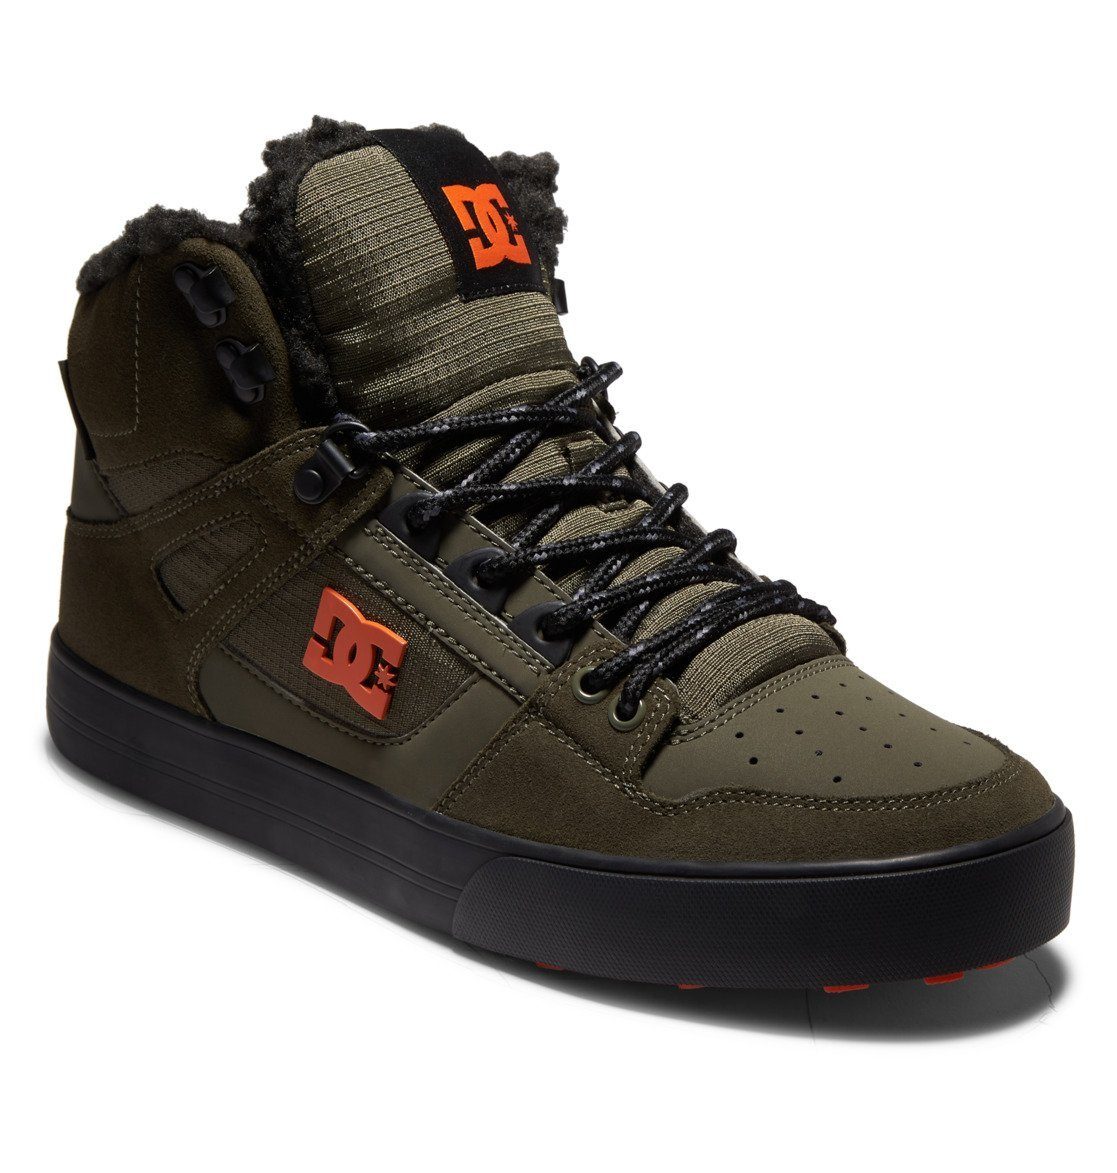 DC Shoes Pure High WNT Winterboots online kaufen | OTTO